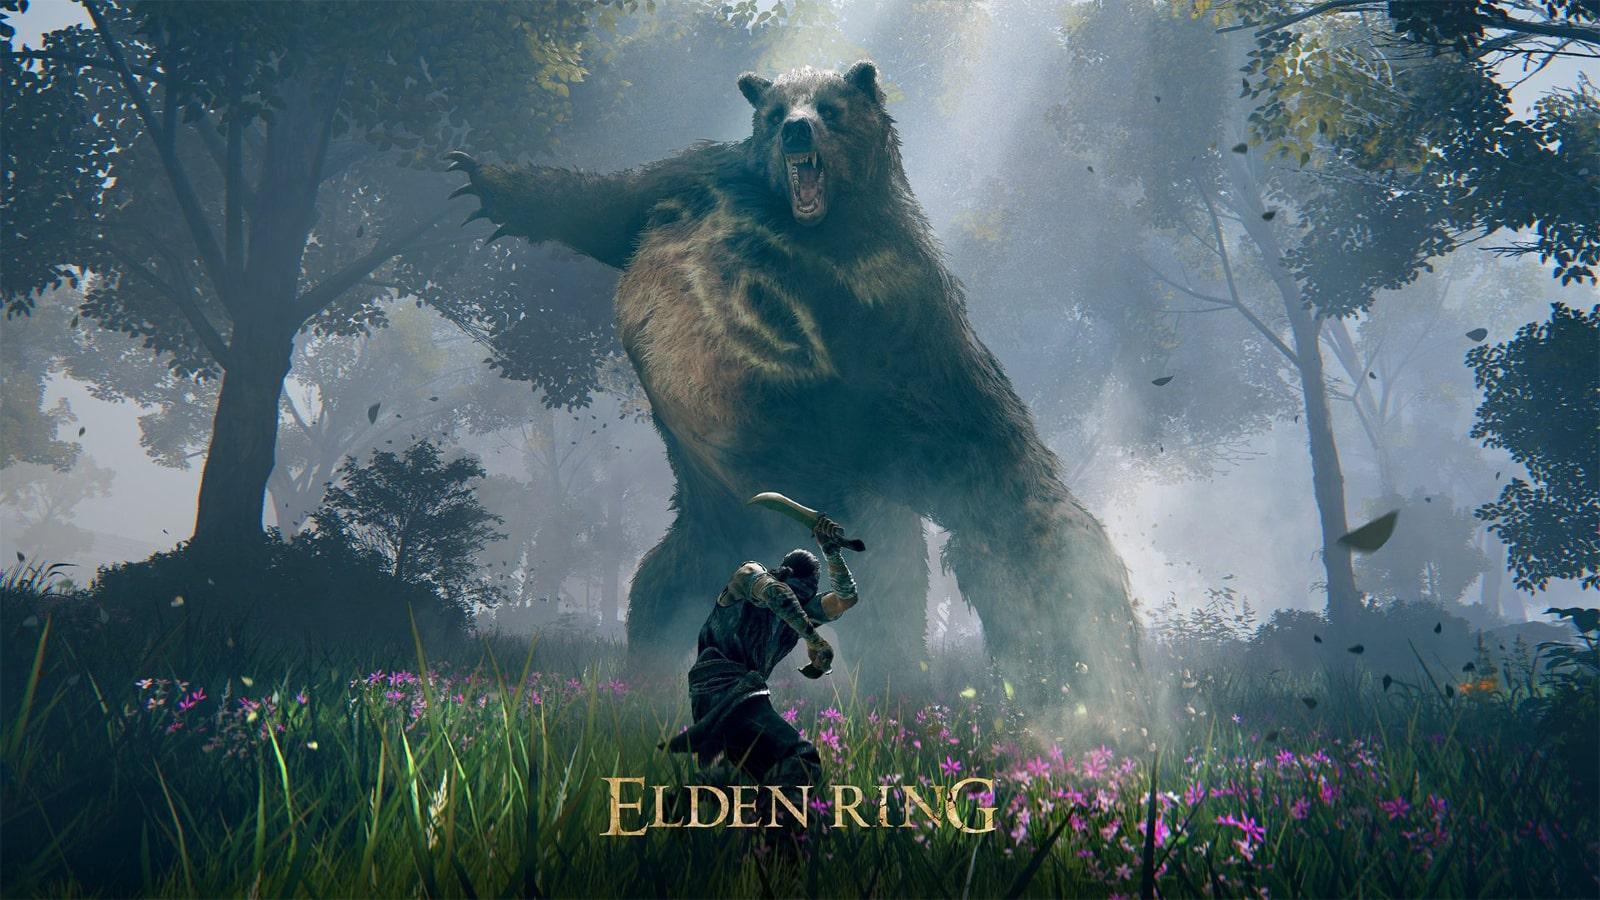 Elden Ring's Minimum PC Requirements Are Interesting to Say the